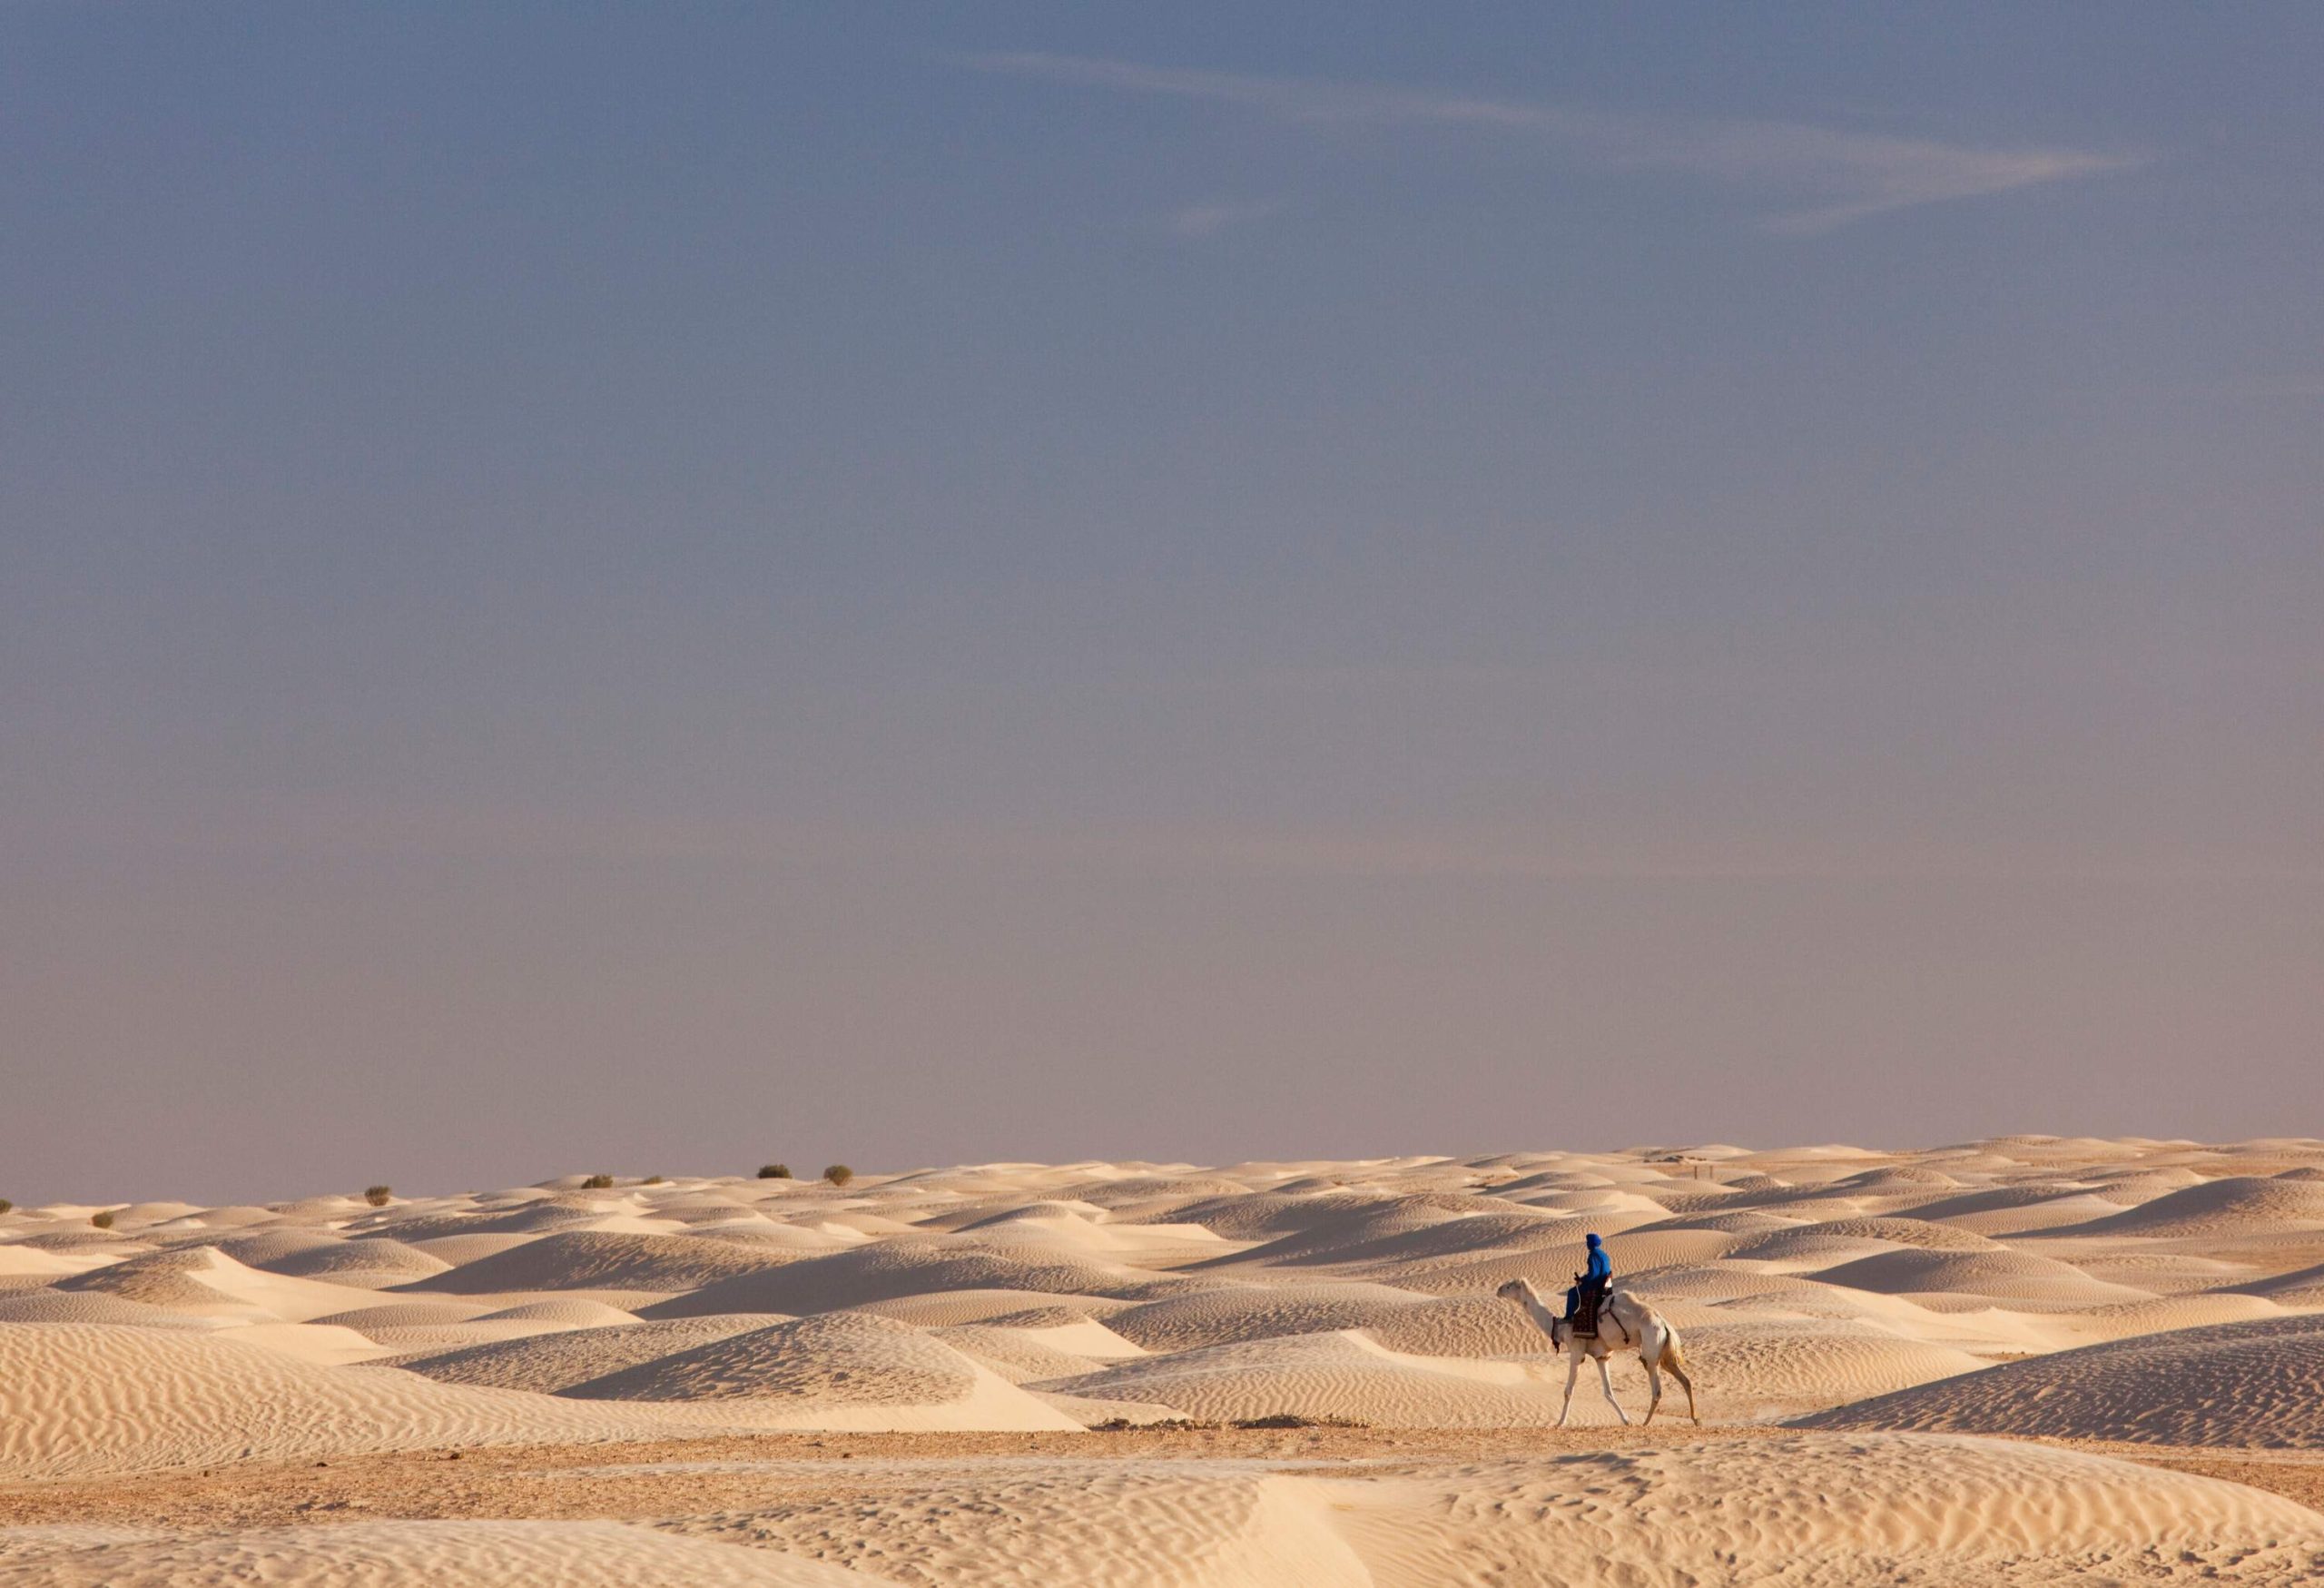 A person rides a camel as they traverse the sand dunes of a wide desert.